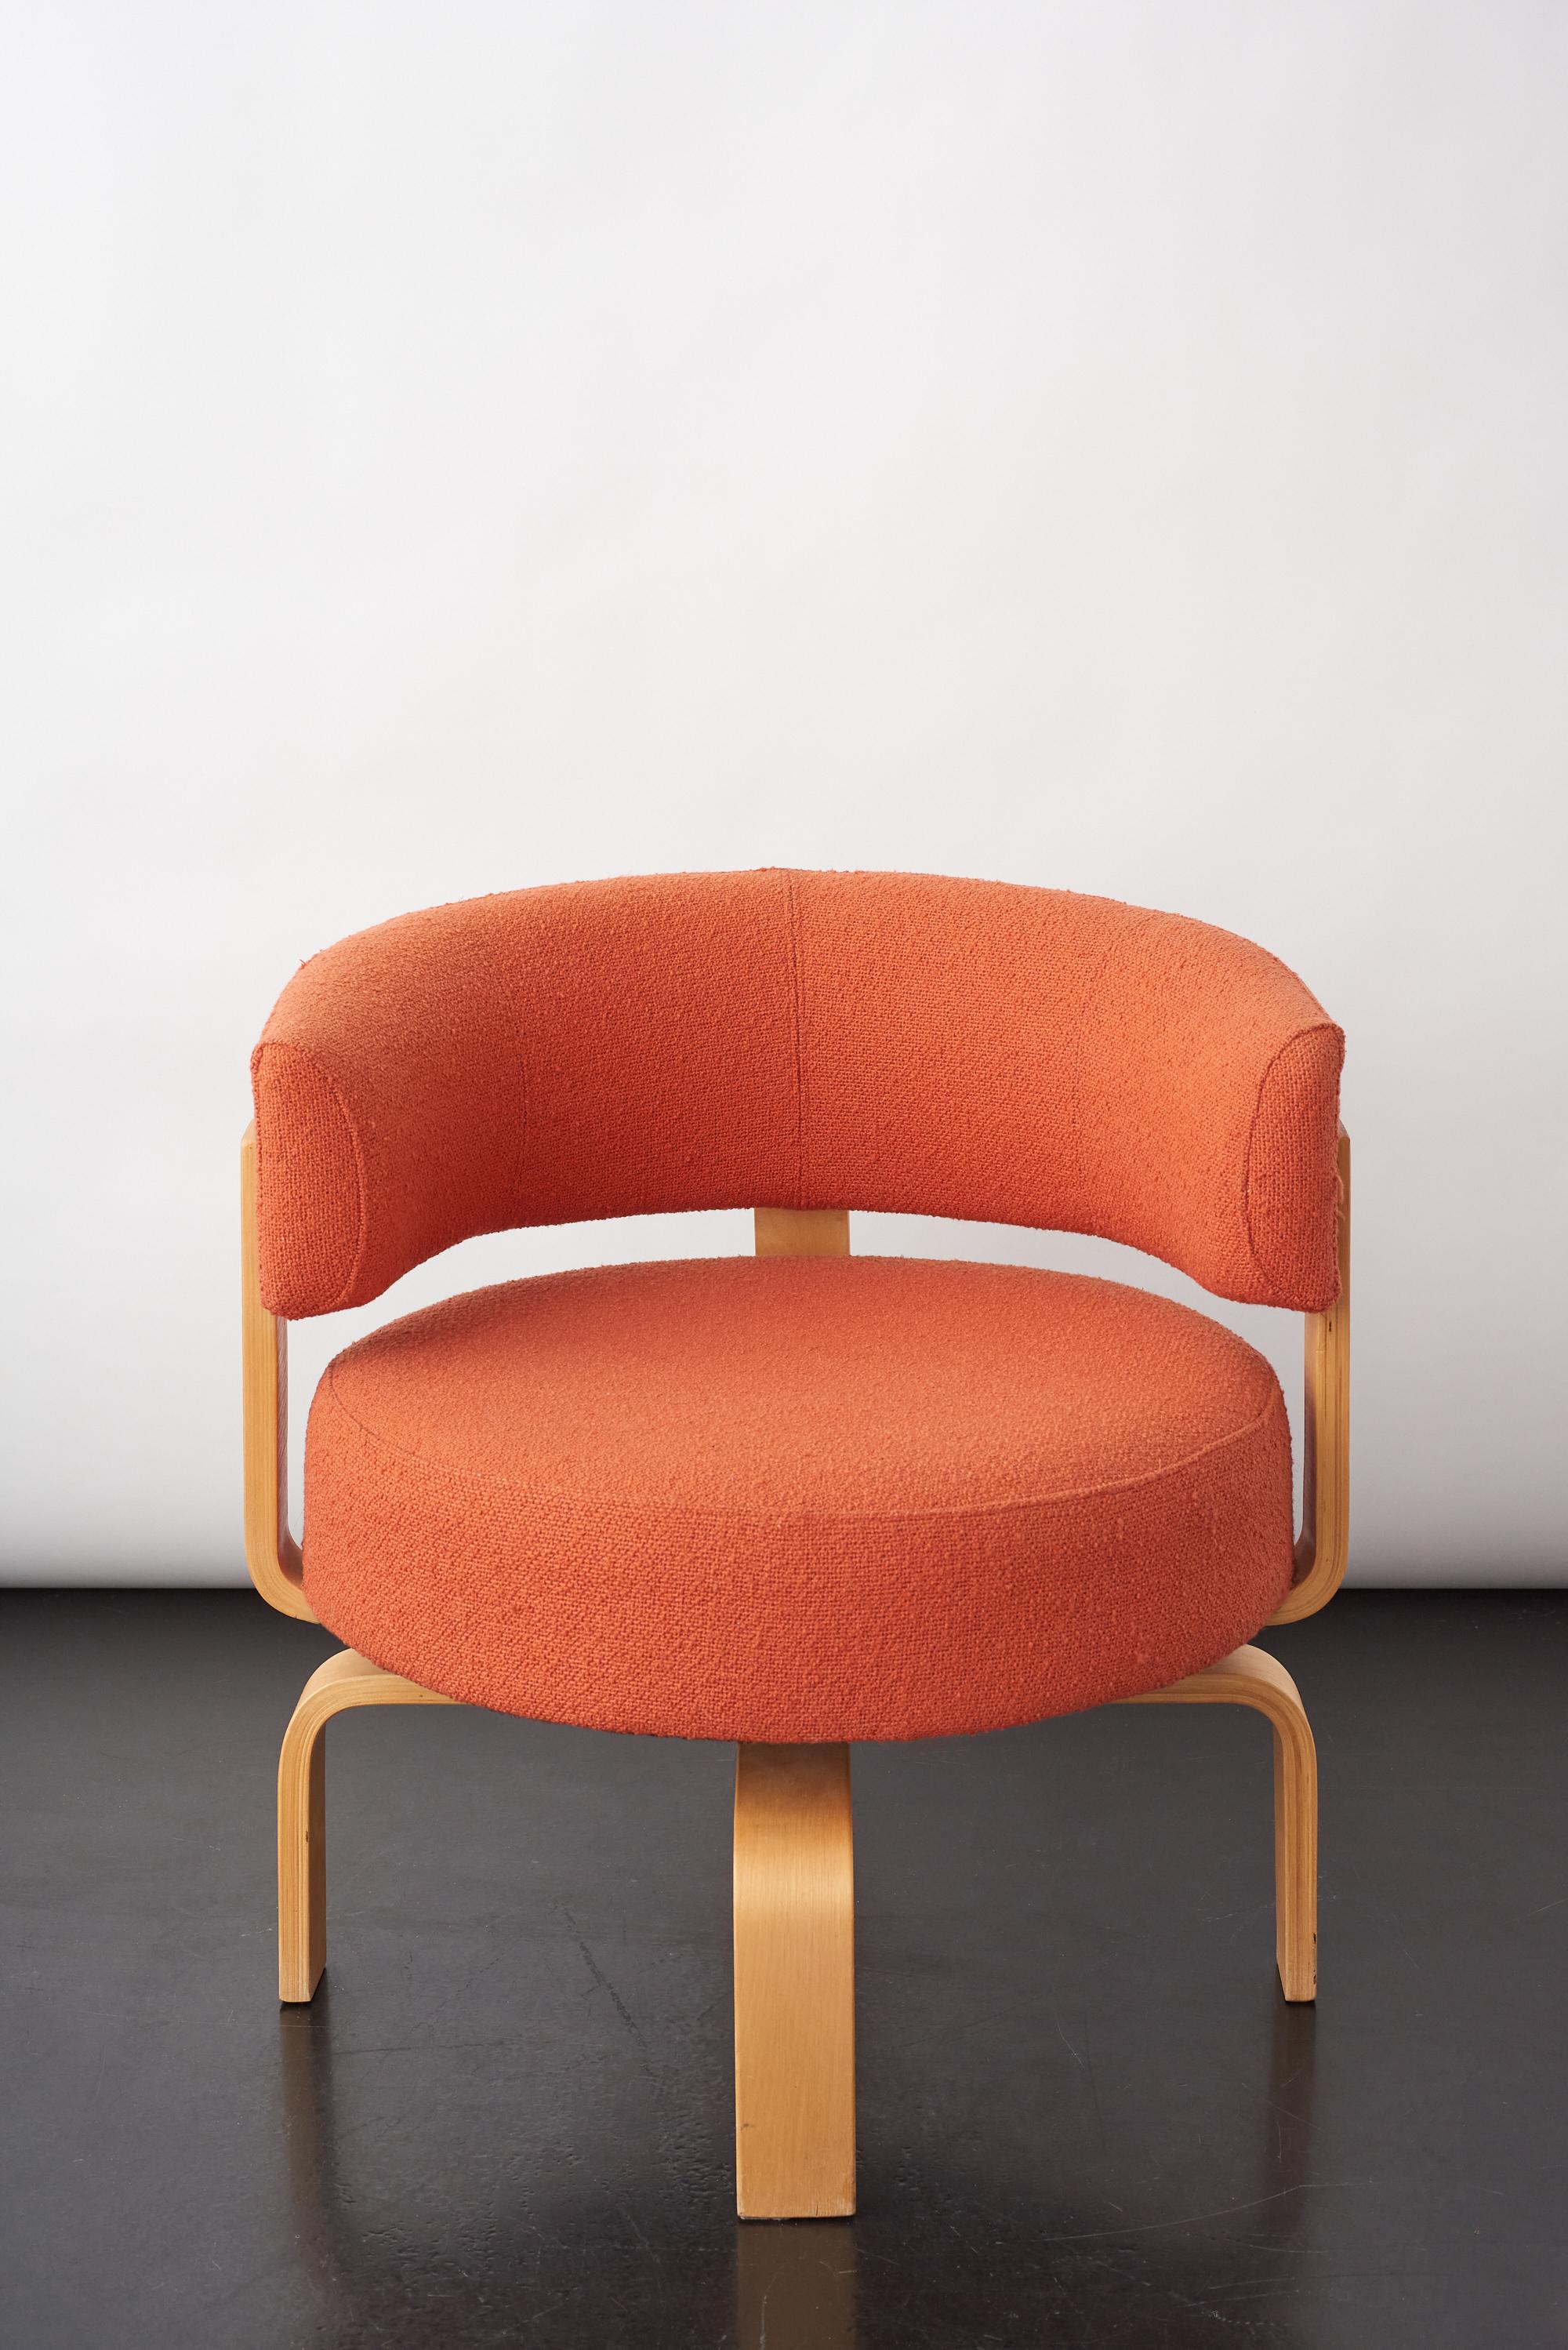 Vintage Fridene swivel armchair by Carina Bengs for IKEA. Bent birch wood and luxe fuzzy wool blend. Super comfortable, 360 degree swivel.
Excellent condition.